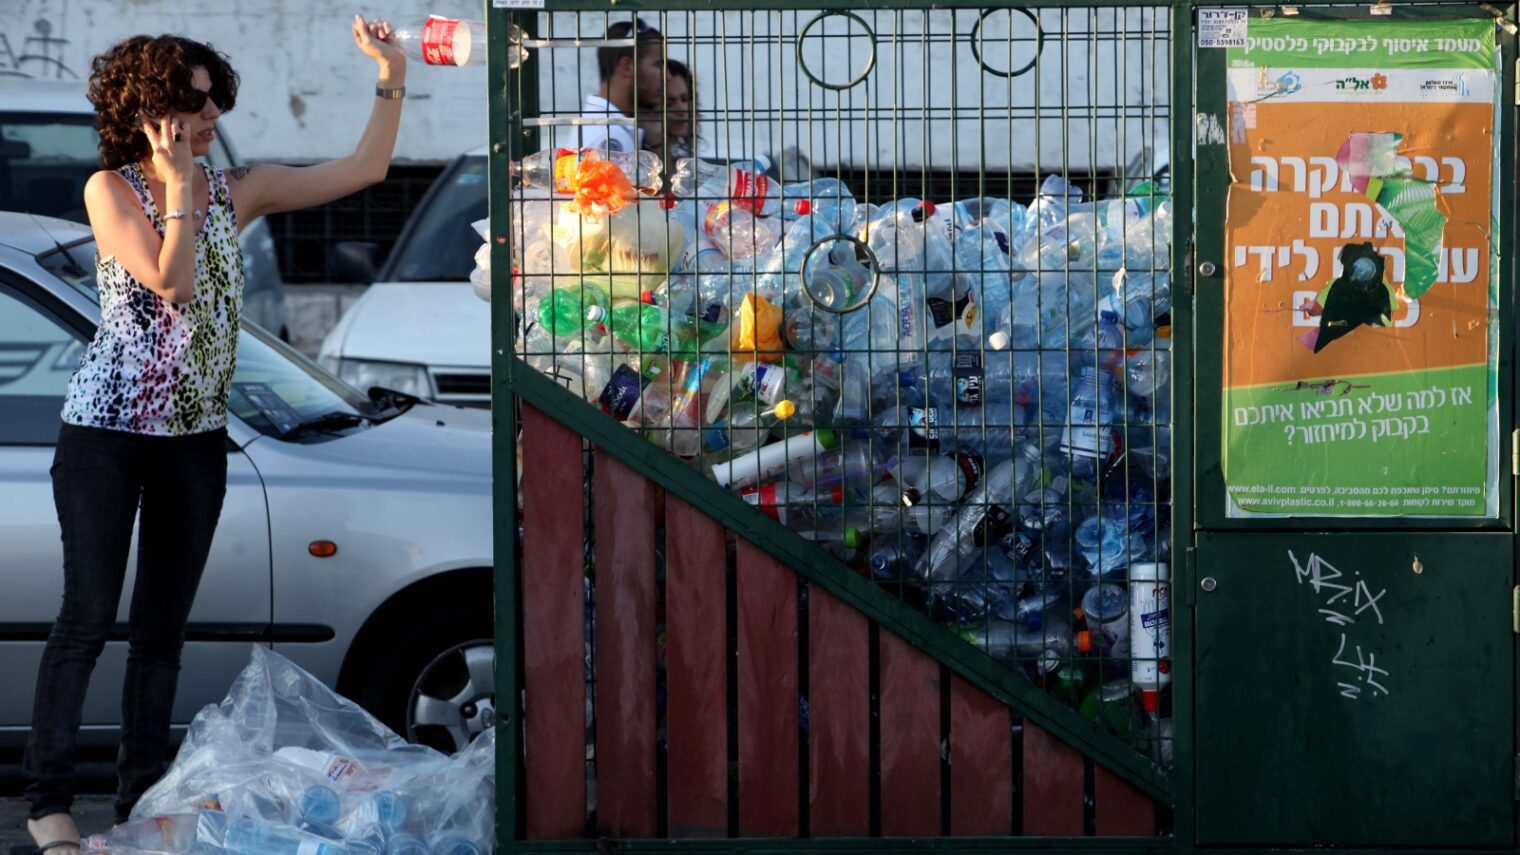 A woman throws a bottle into the recycling bin in Jerusalem. Photo by Nati Shohat/Flash90